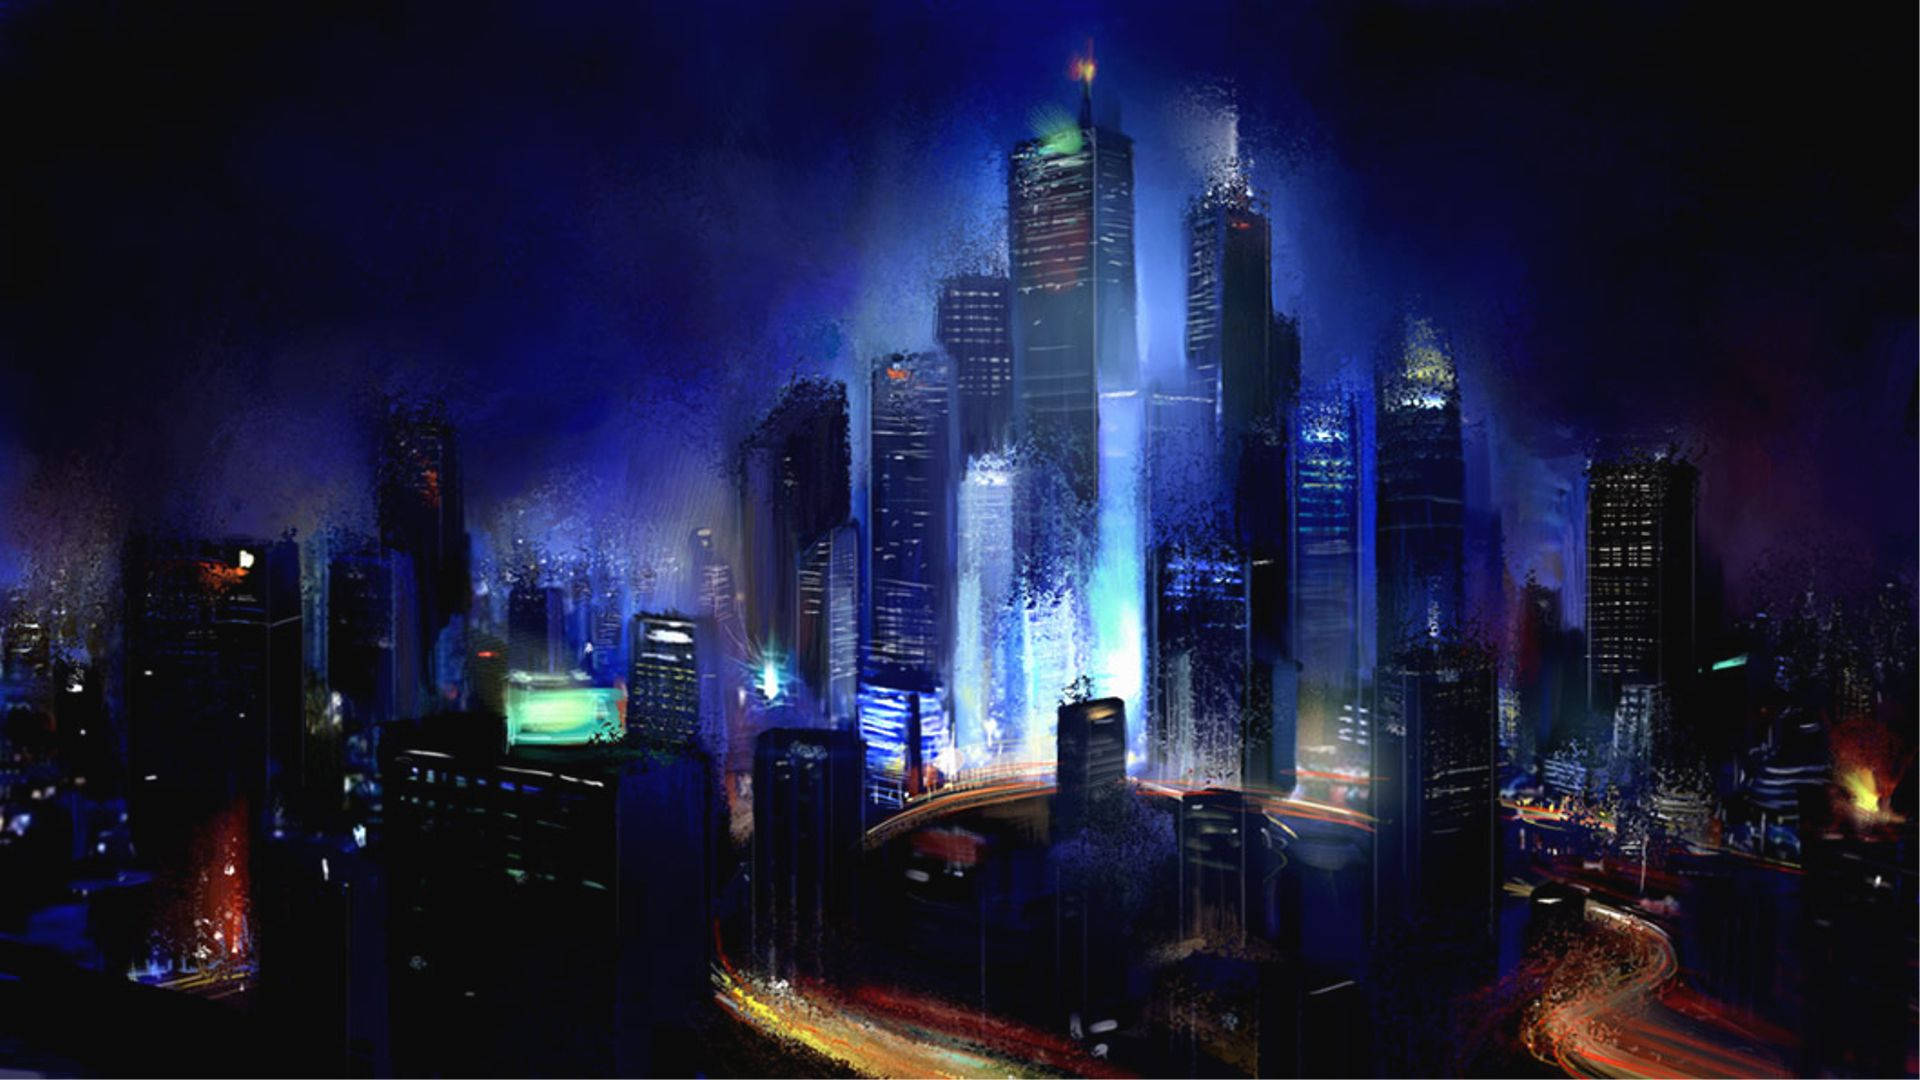 Beautiful Cityscape Of Skyscrapers Illuminated By Illuminated By Warm Lights Background